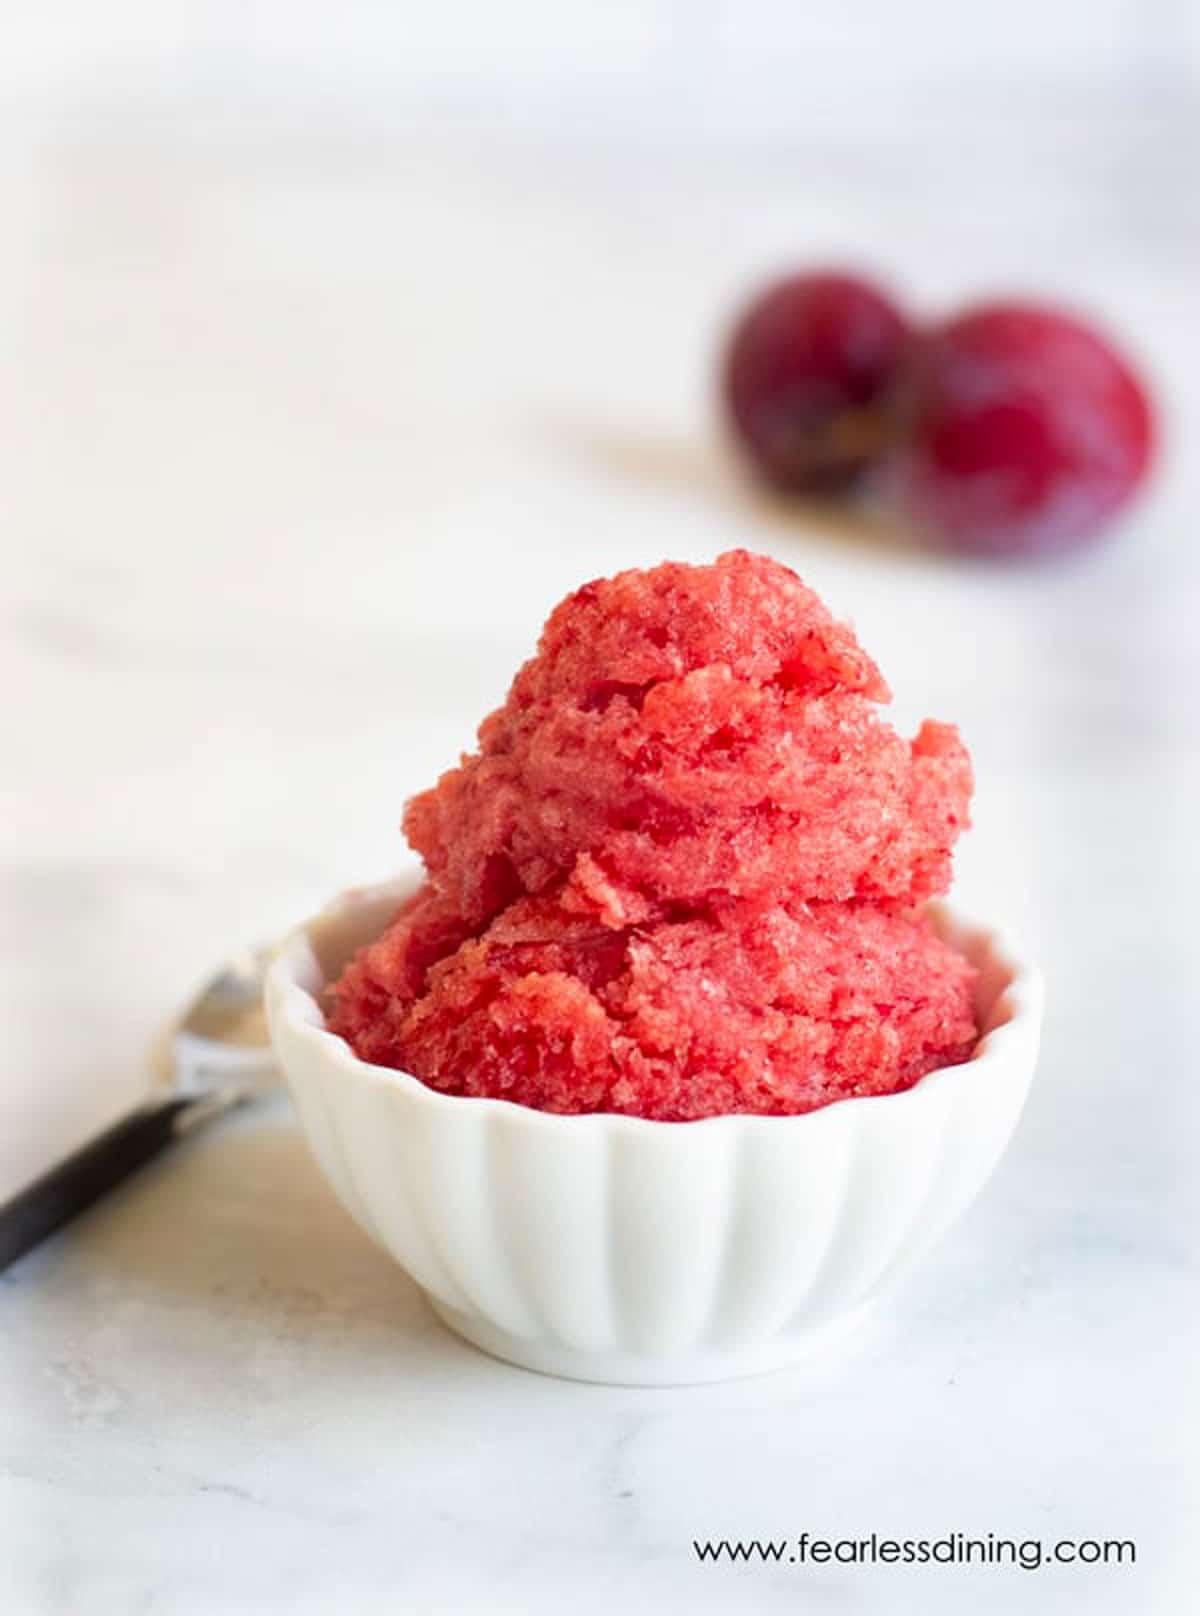 The frozen plum sorbet in a scalloped white bowl.